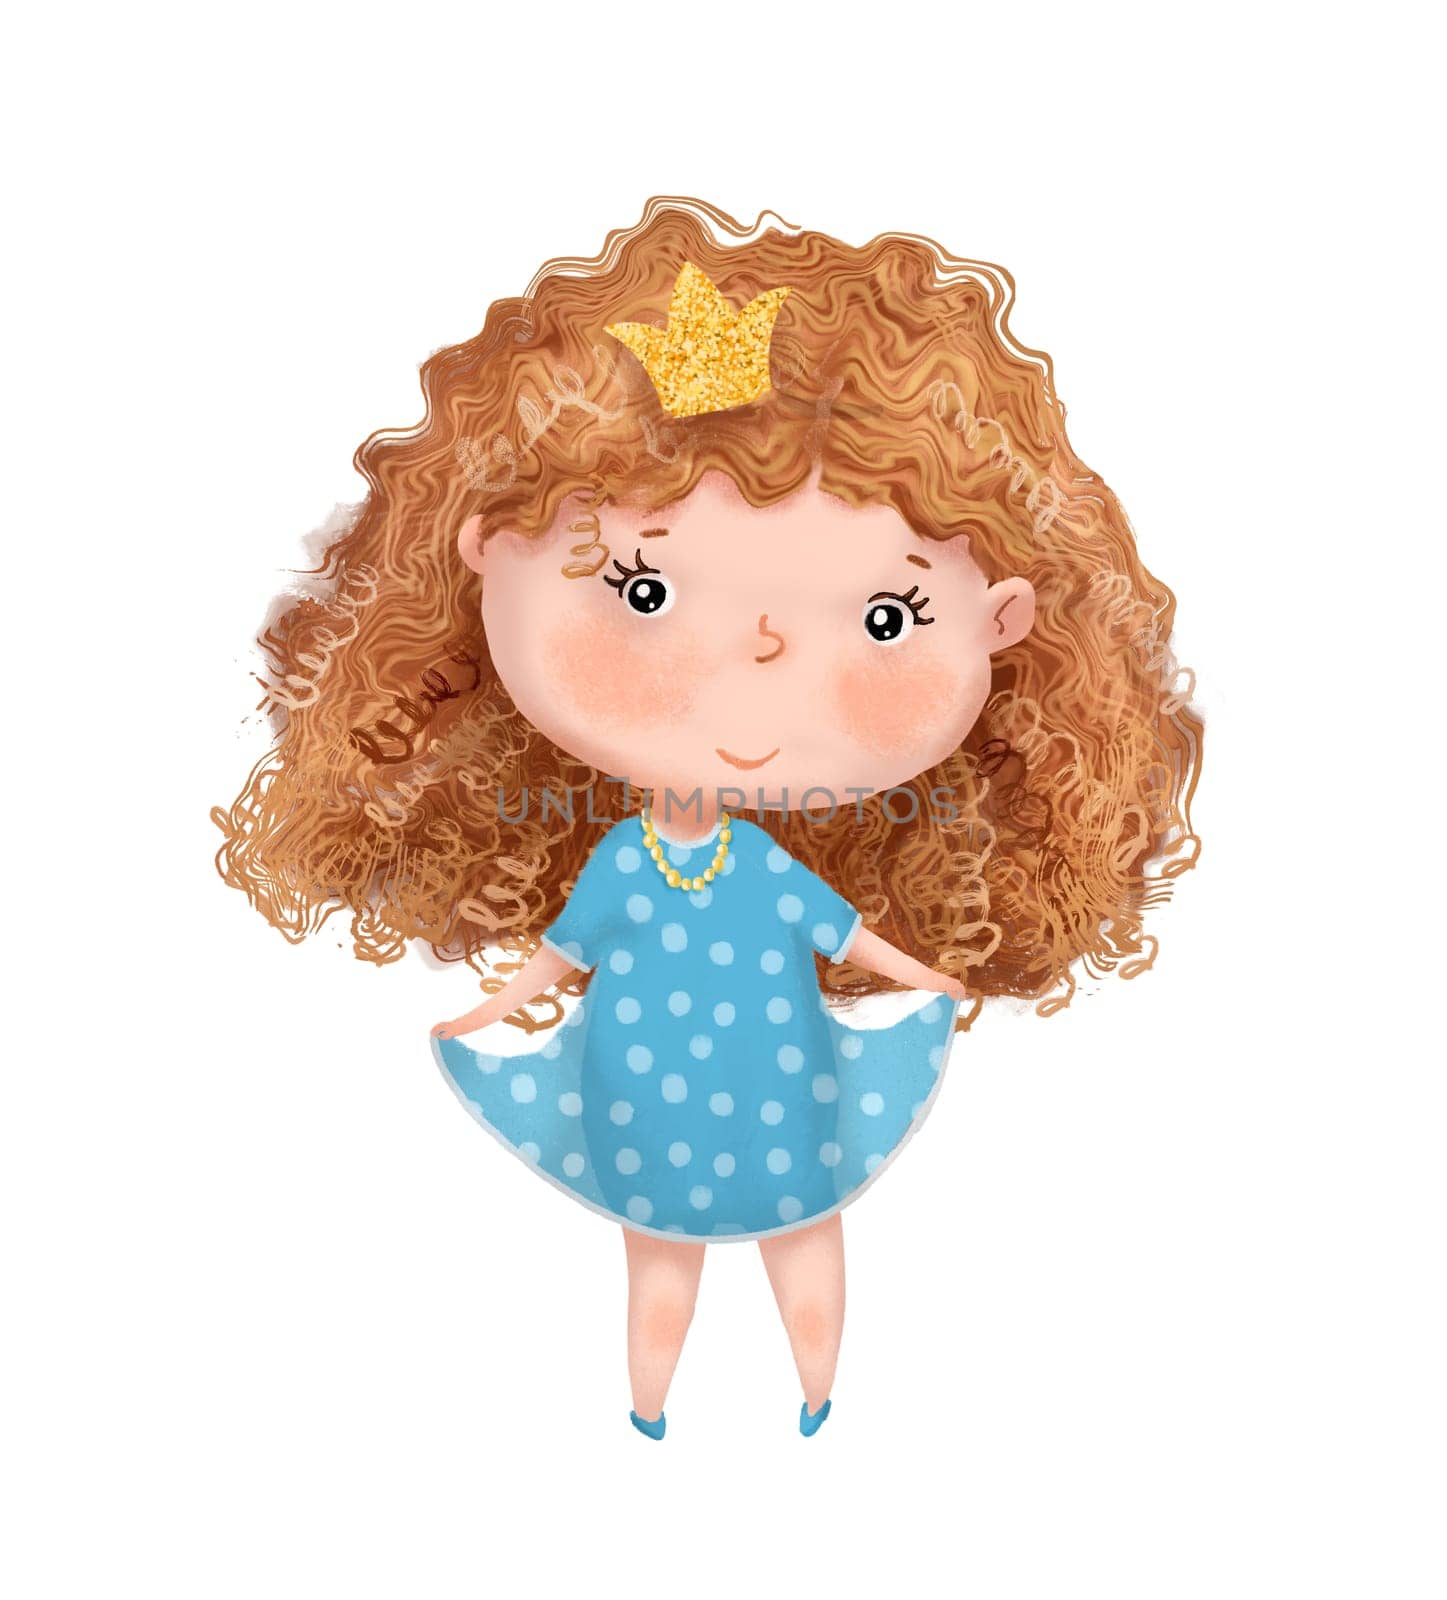 Little cute princess with curly hair, wearing blue dress. Hand drawn Illustration isolated on white background. by ElenaPlatova